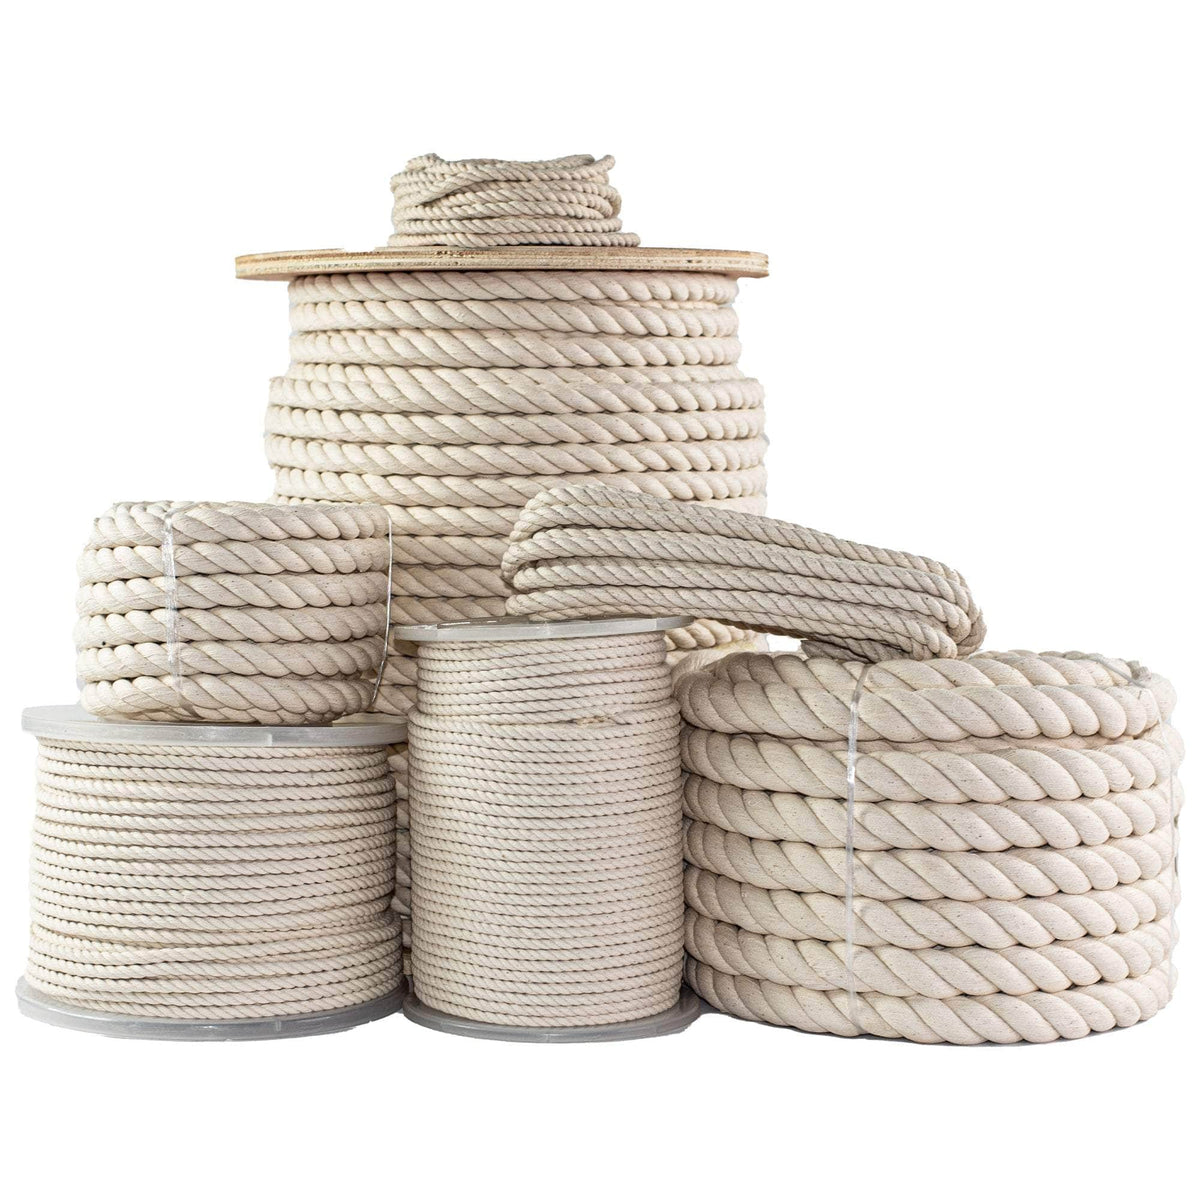 100% Twisted Cotton Rope | 3-Strand Twisted - USA-grown and 100% Safe! Not  Treated, Bleached, or Dyed!